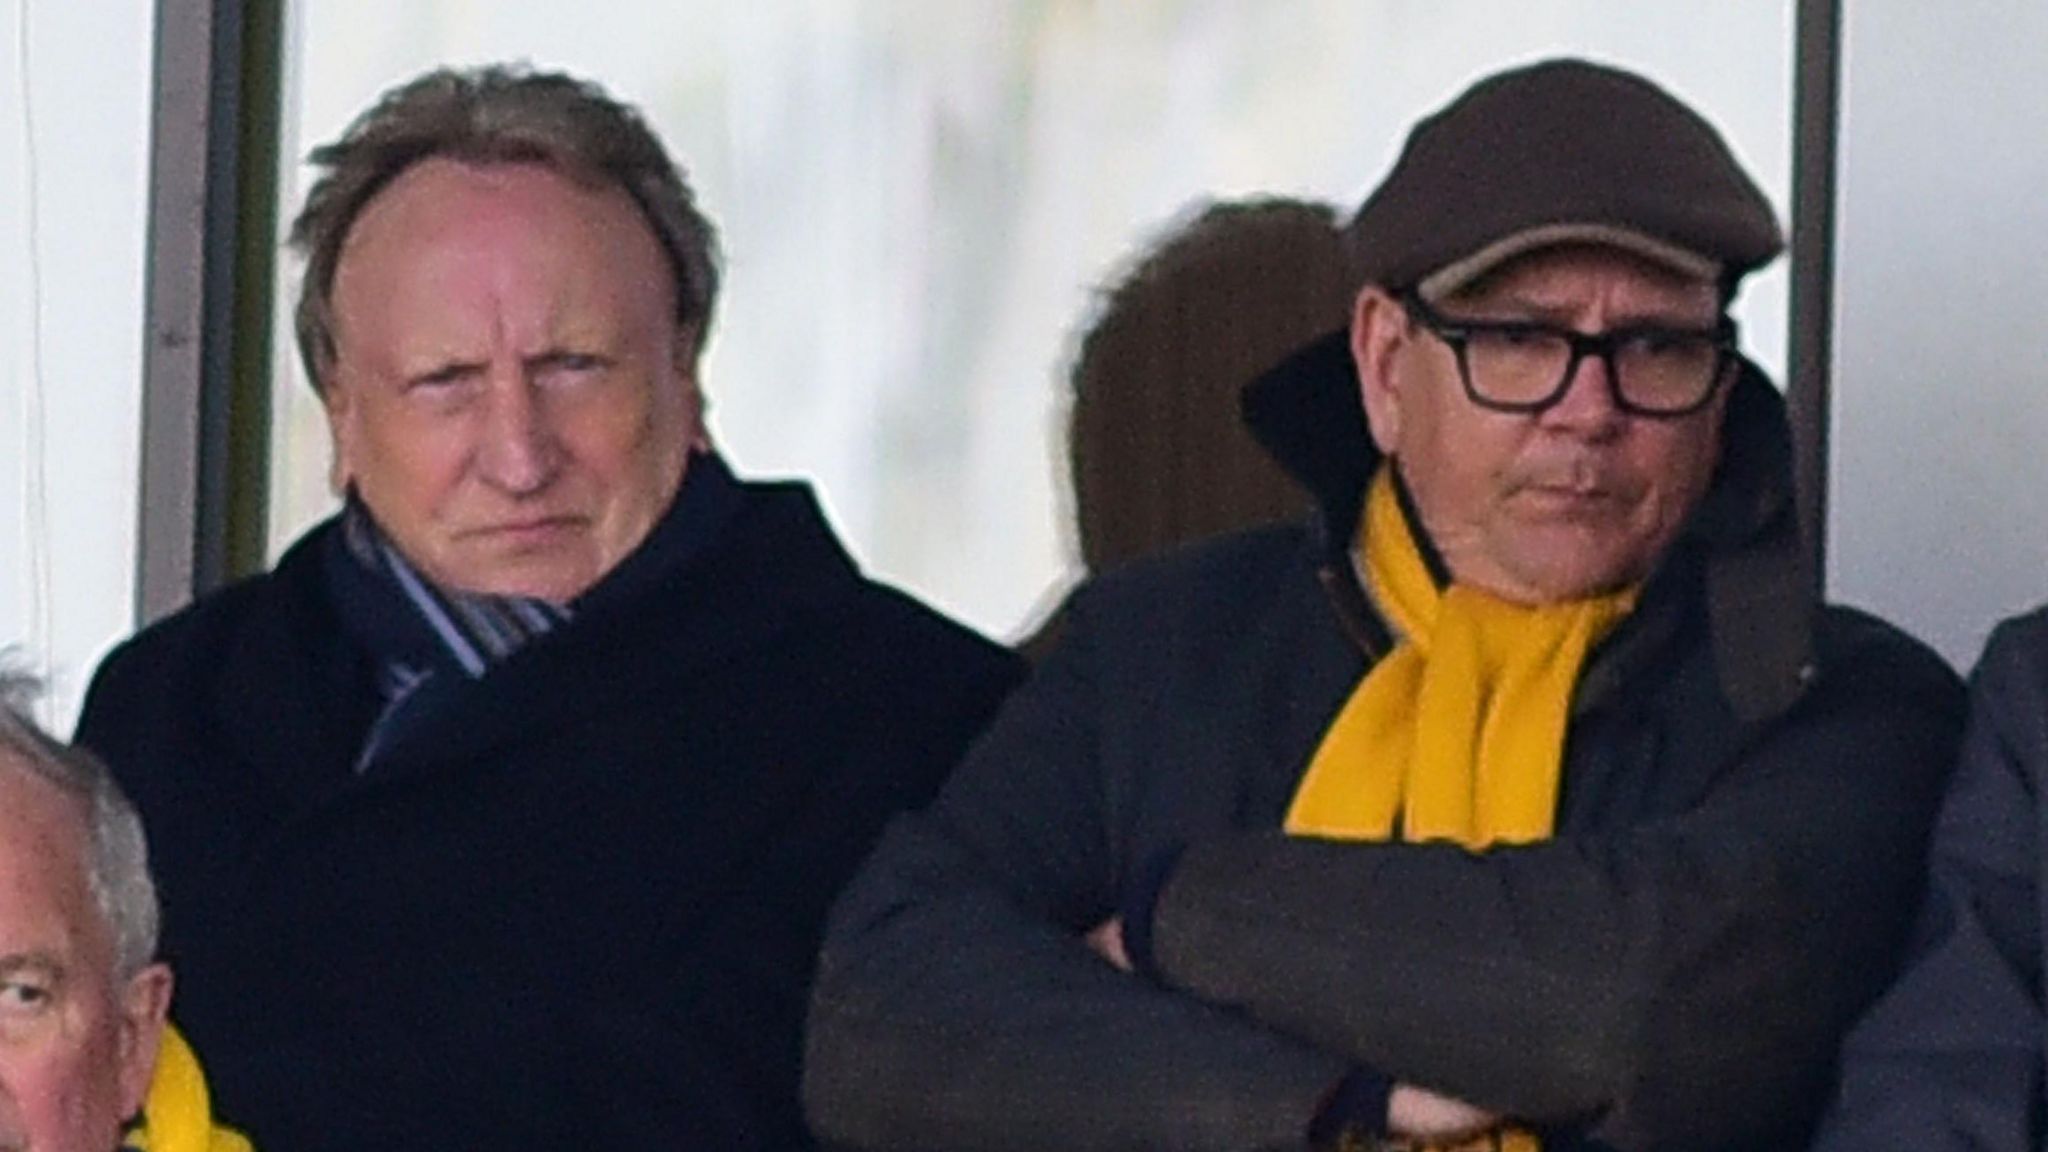 Neil Warnock (left) and Michael Westcott (right) watch a Torquay game